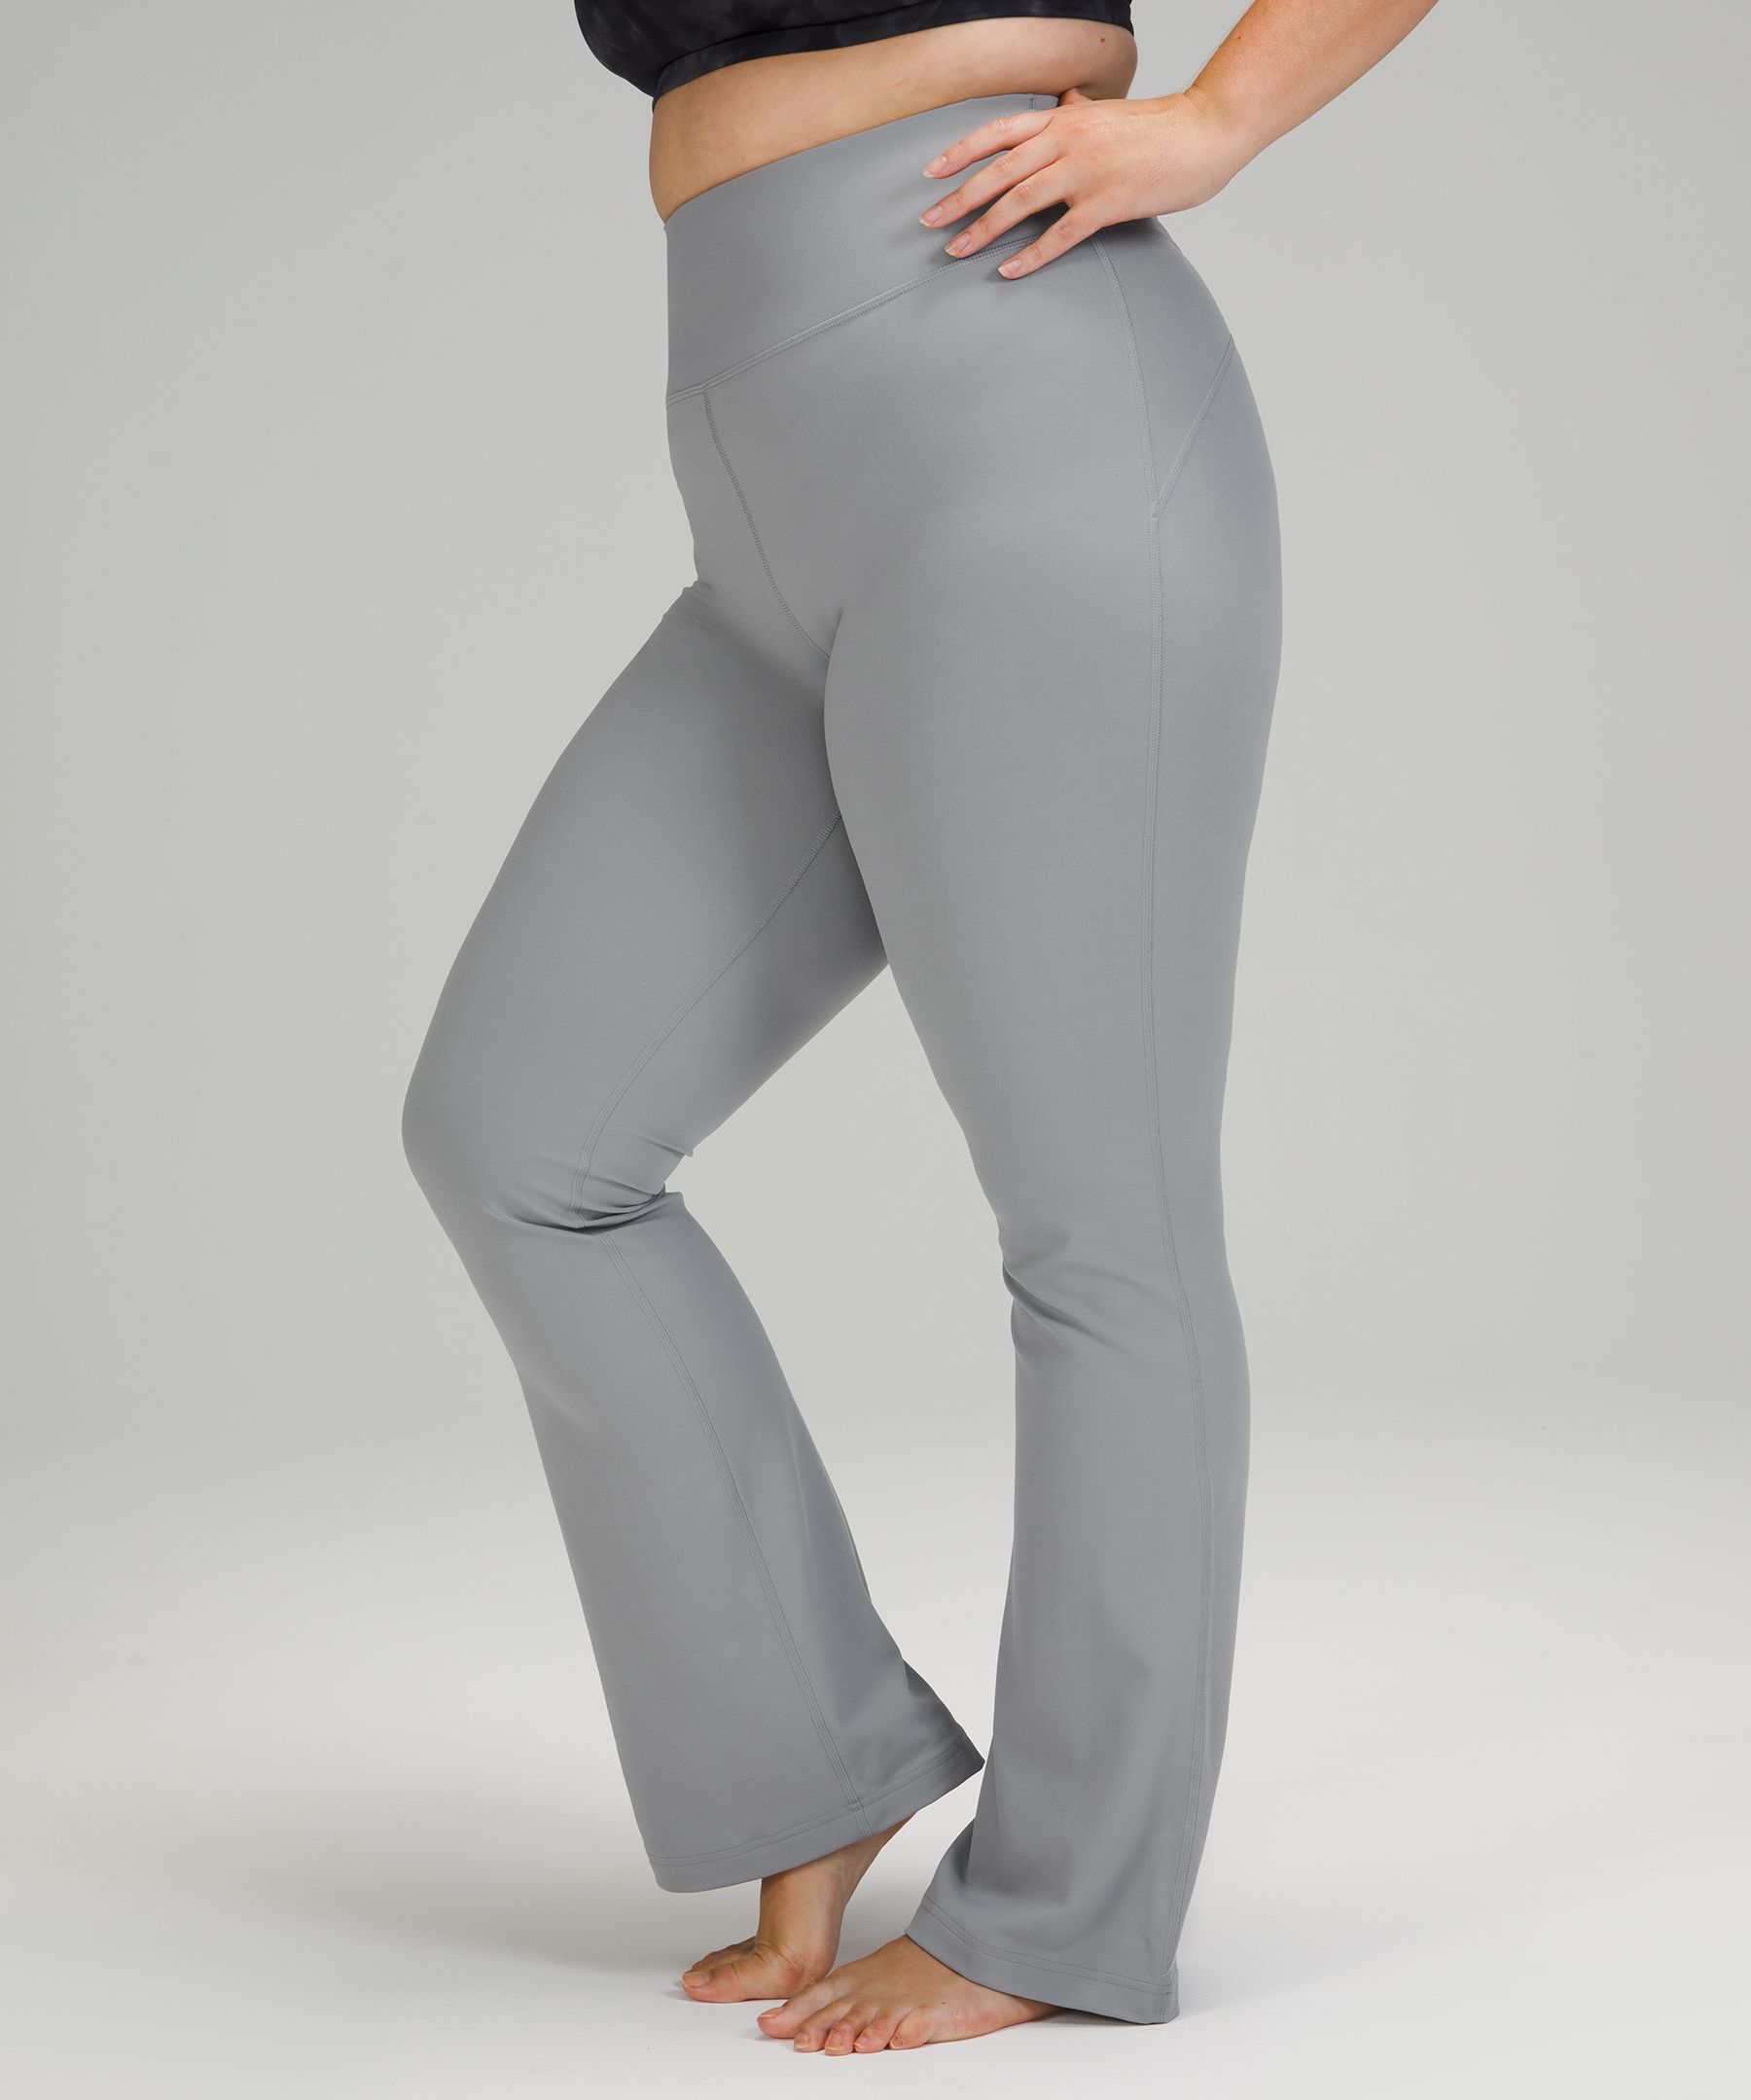 Lululemon Groove Pant Reviews Uk  International Society of Precision  Agriculture